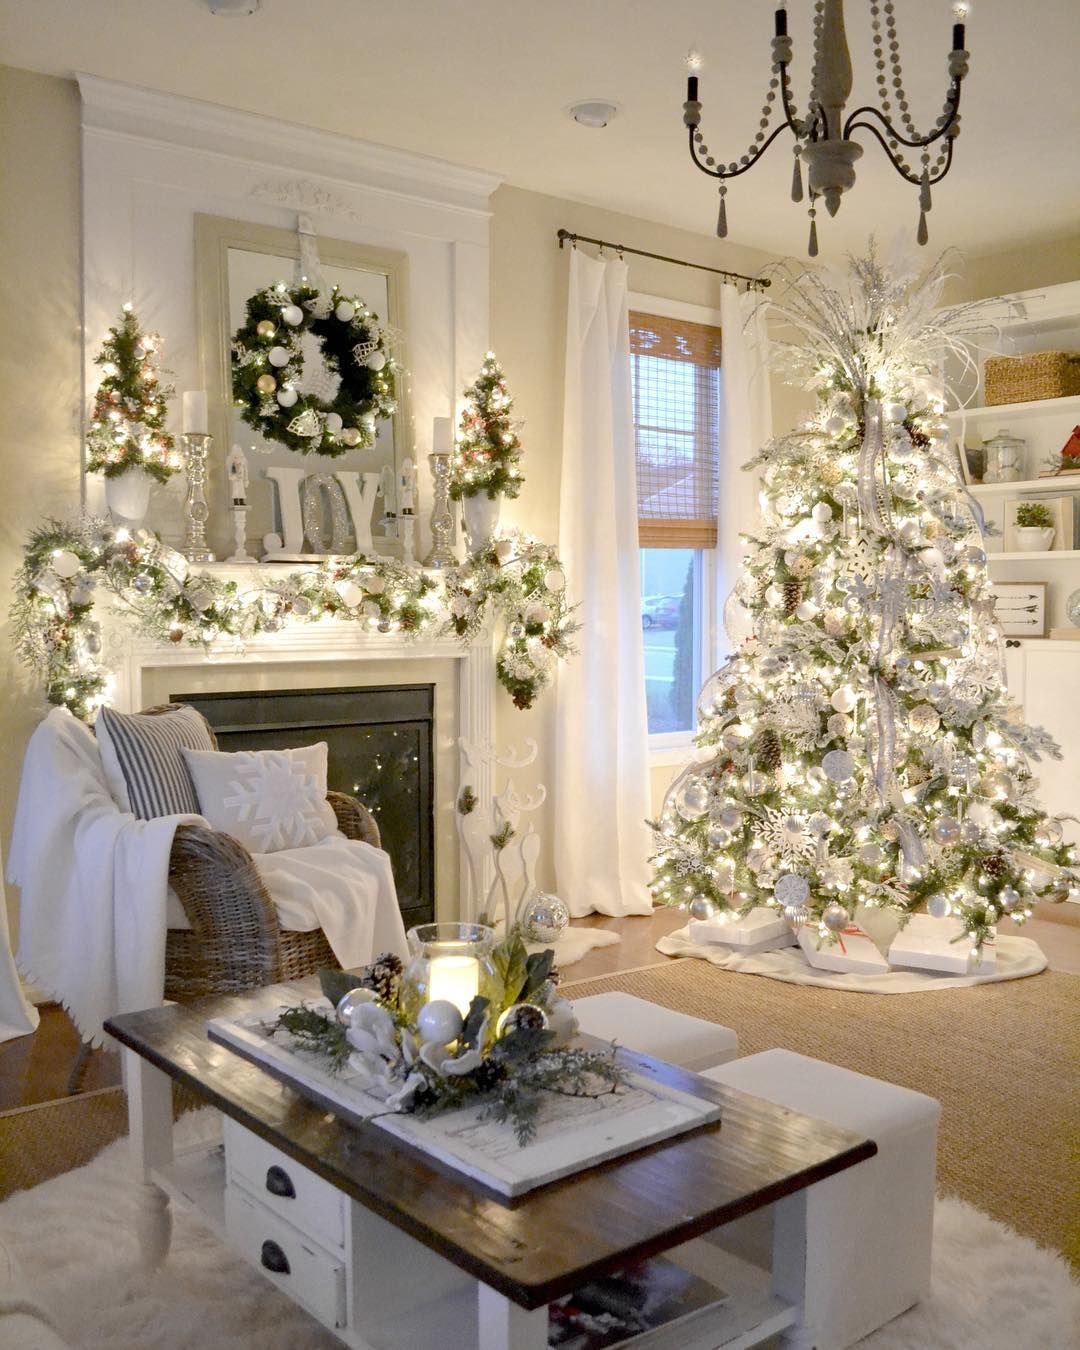 Christmas decor and curtain rod bracket ideas to match in white interior